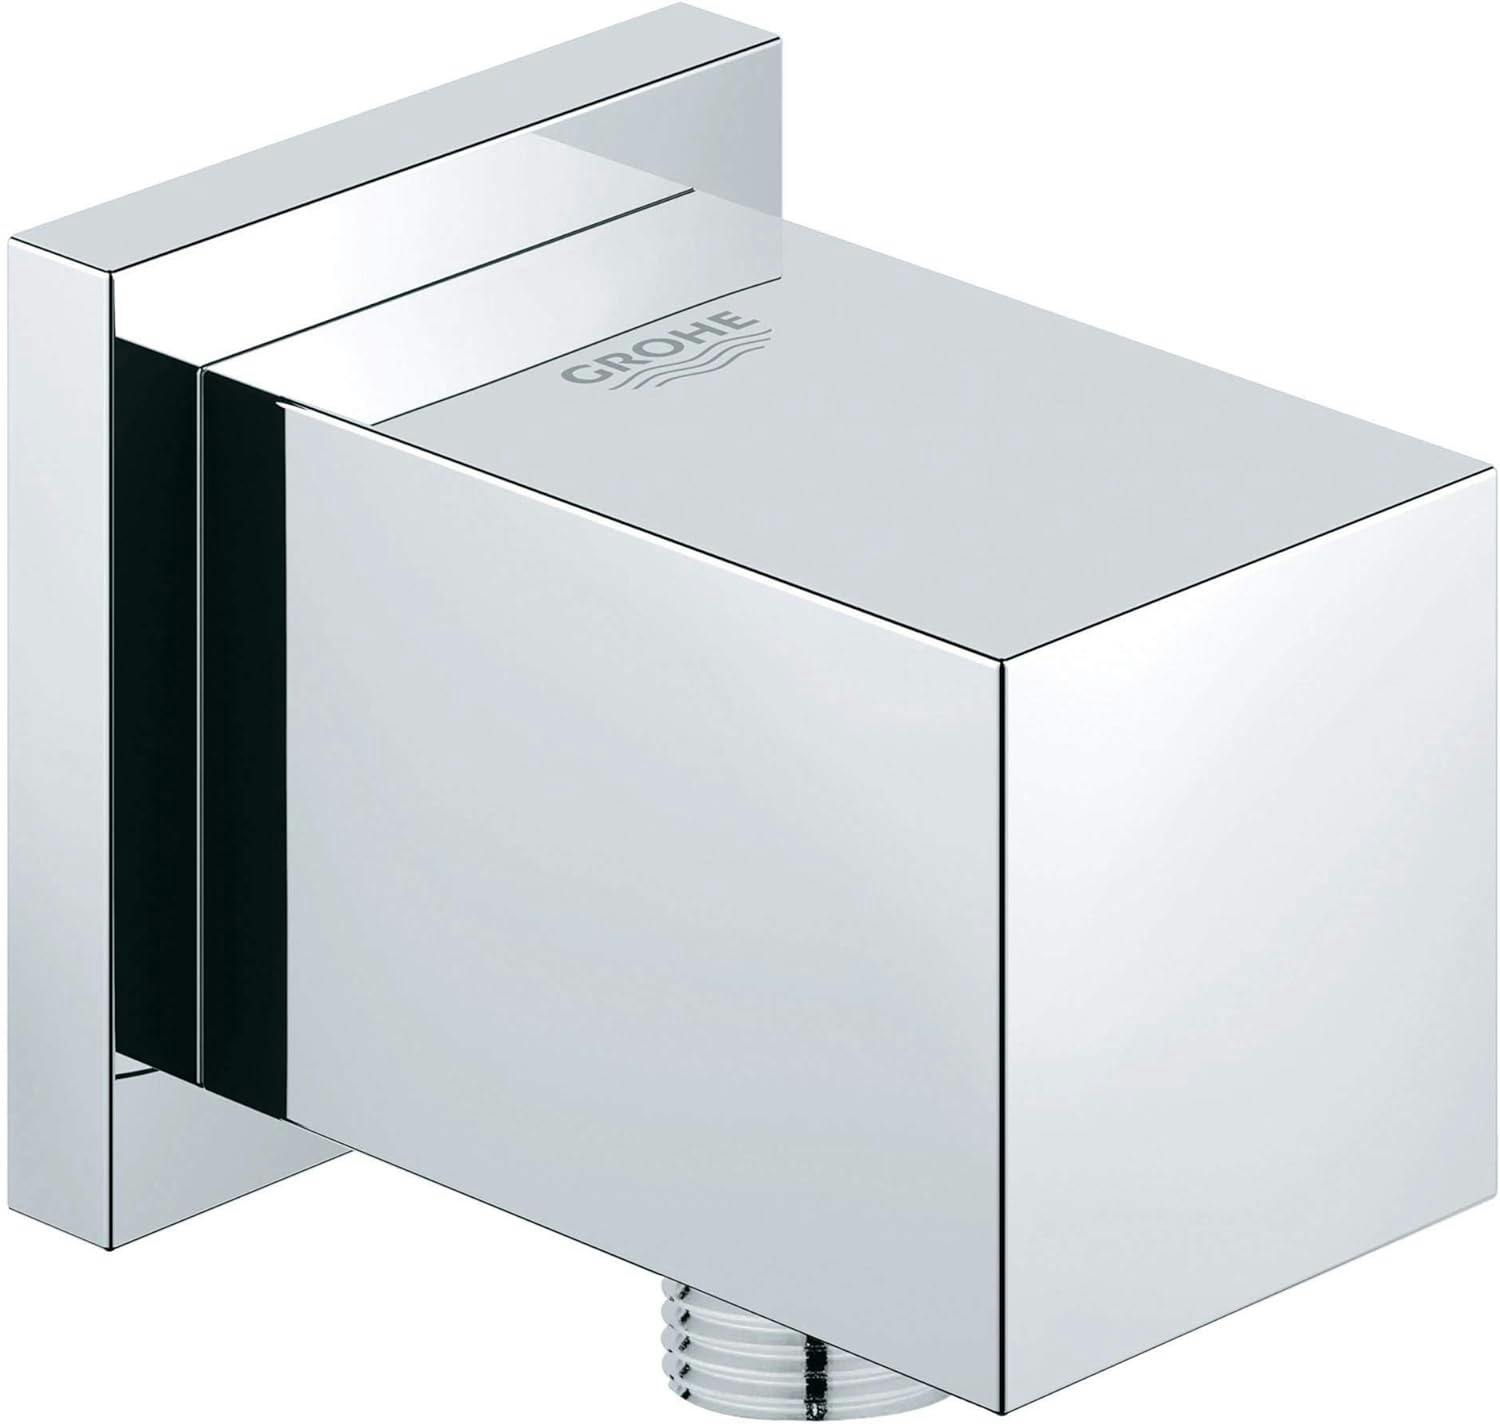 Euphoria Cube Modern Chrome Shower Wall Union with Backflow Prevention